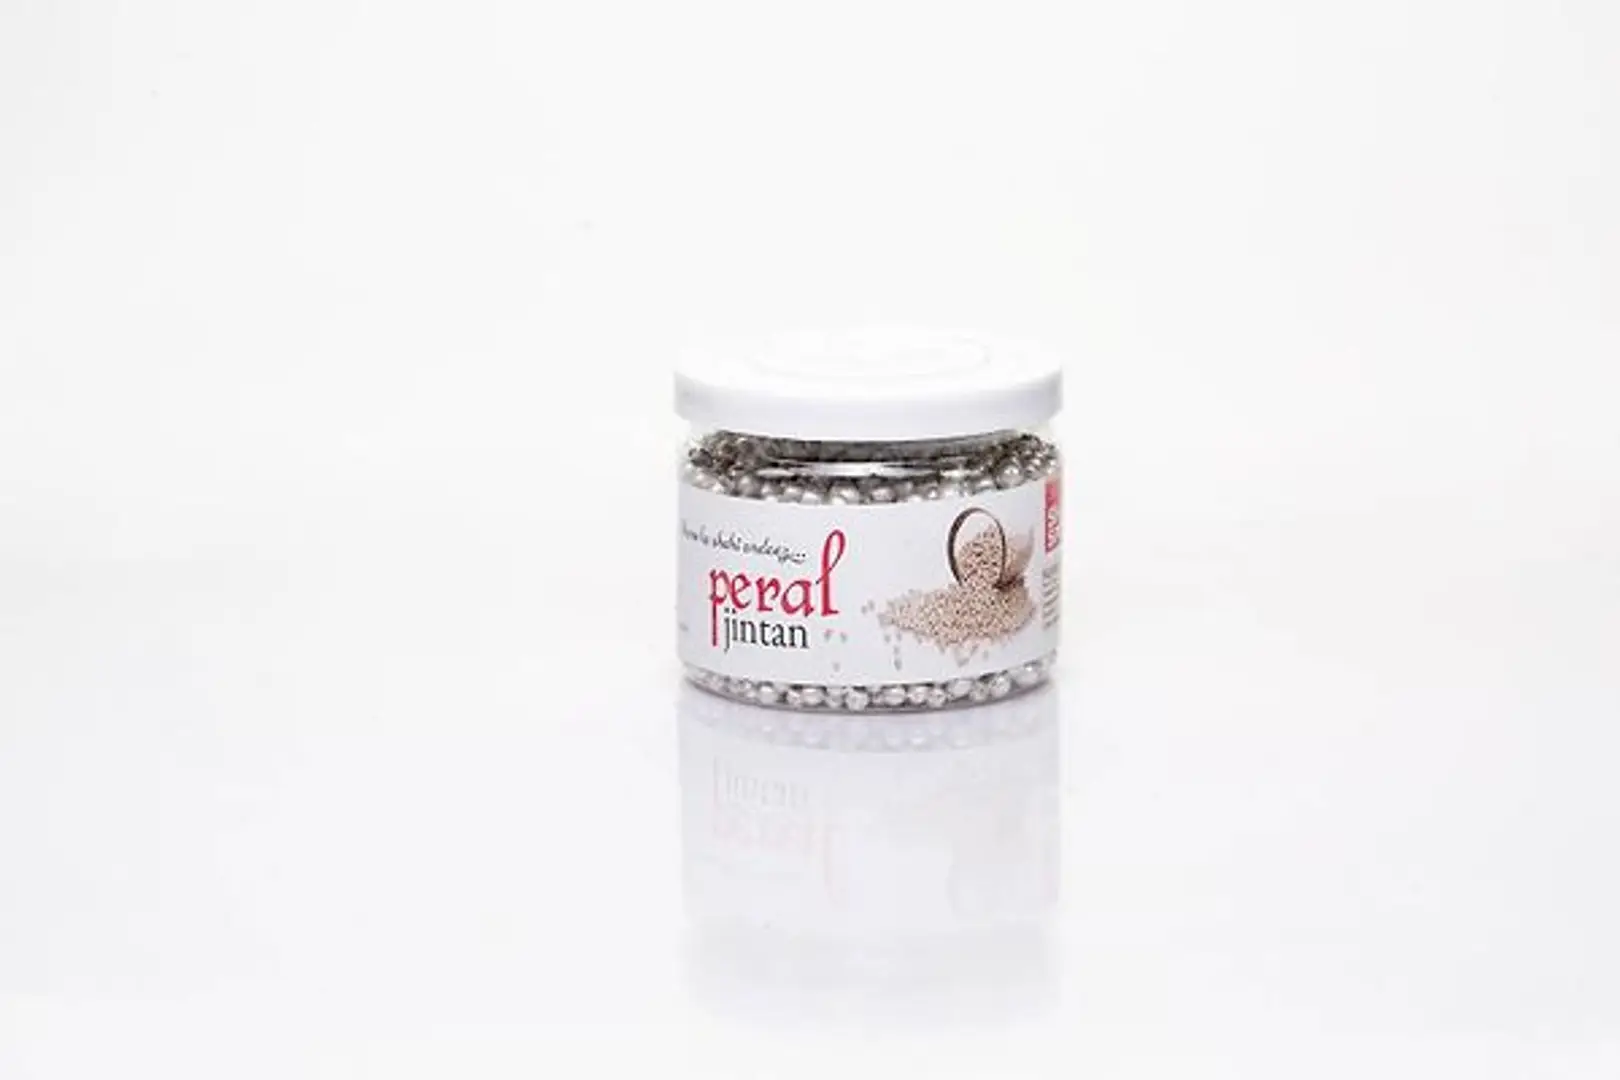 Shahi Spoon Peral Jintan (Silver Mint) Mouth Freshener Mukhwas,60gm-Price Incl.Shipping